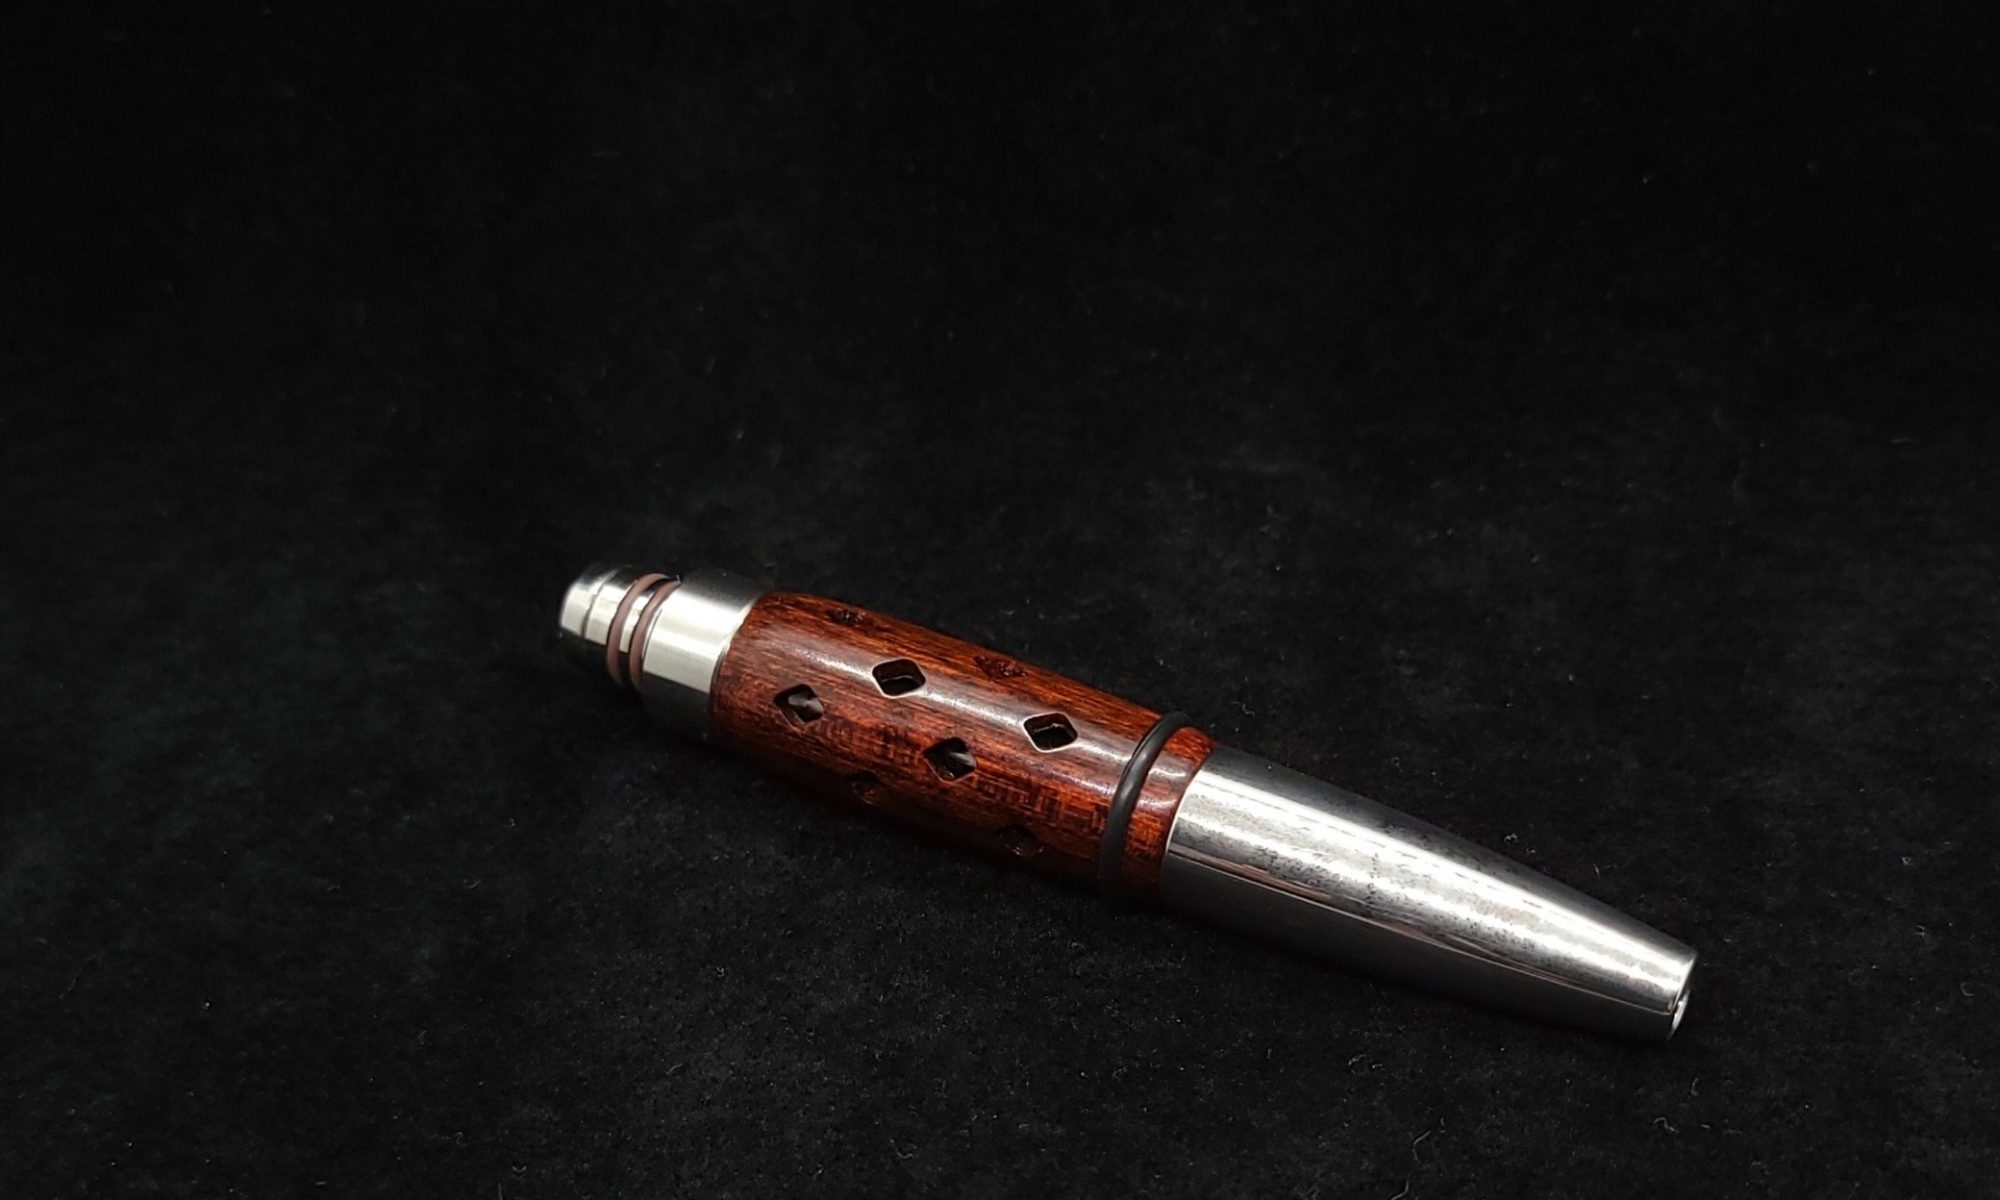 This image portrays Anvil Vestratto Heat Shield Upgrade-Snakewood by Dovetail Woodwork.